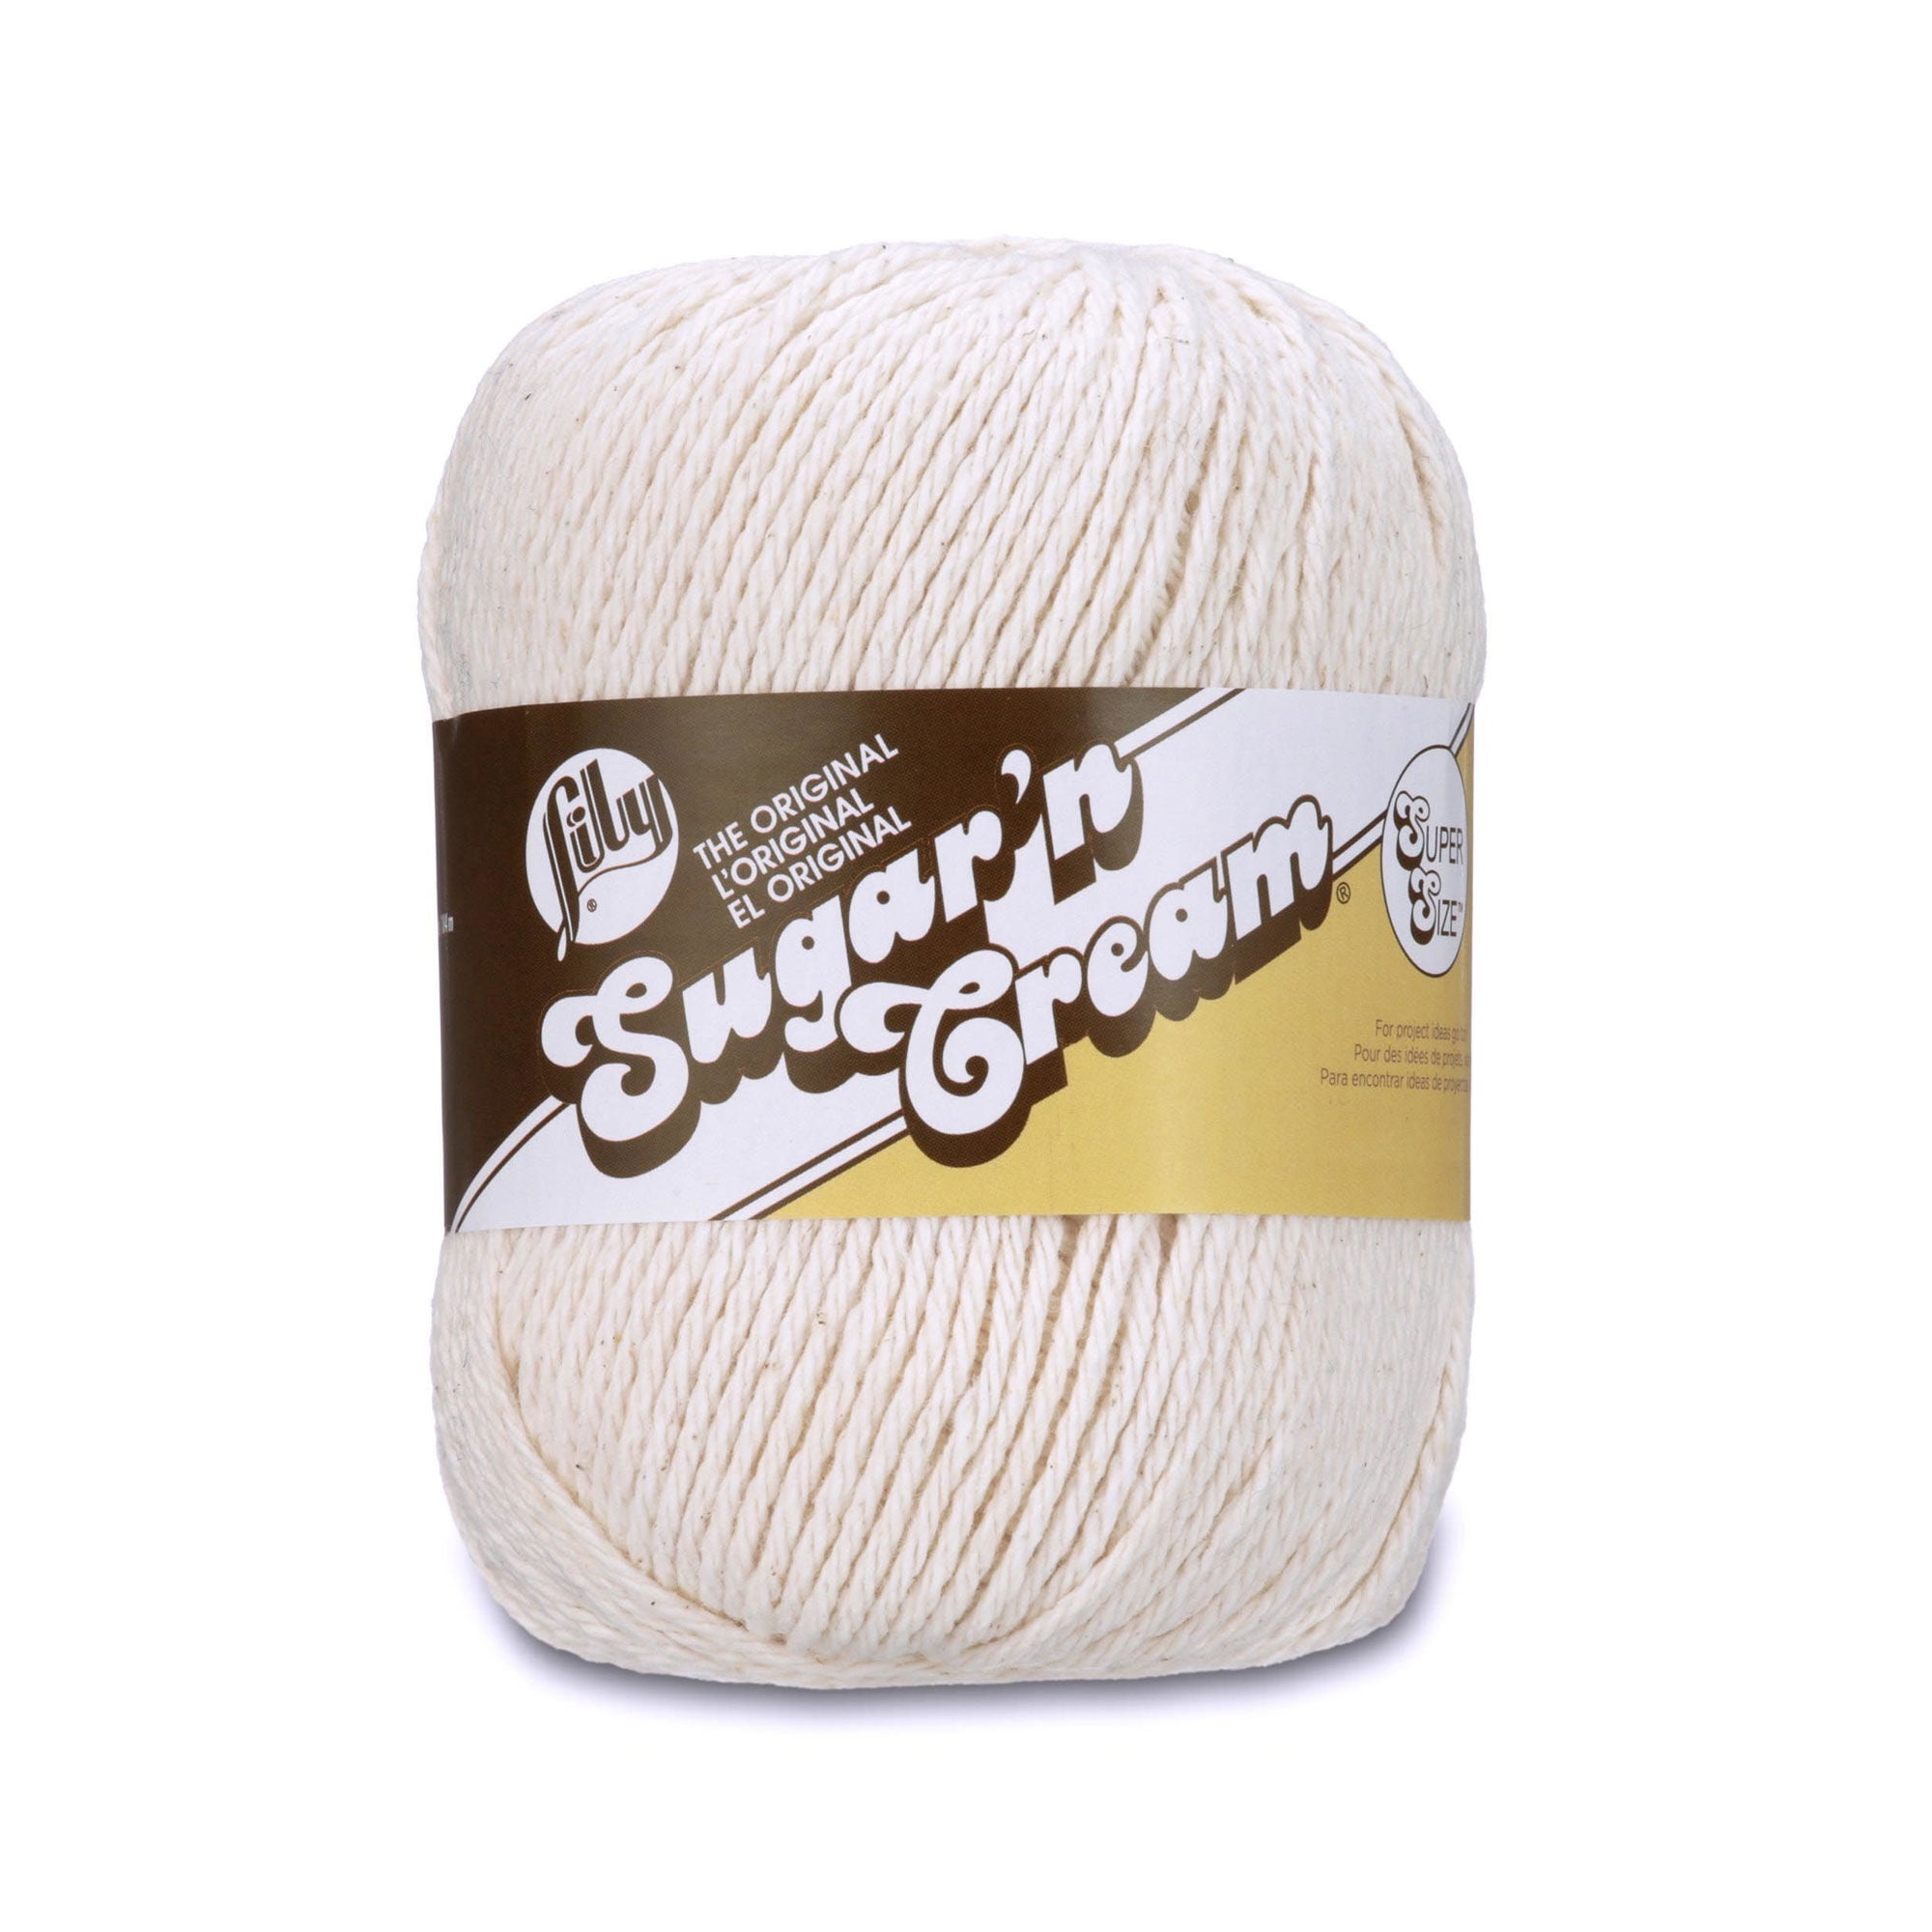 Undyed Glossy Cotton Yarn  DK Weight 100 Grams, 200 Yards, 4 Ply